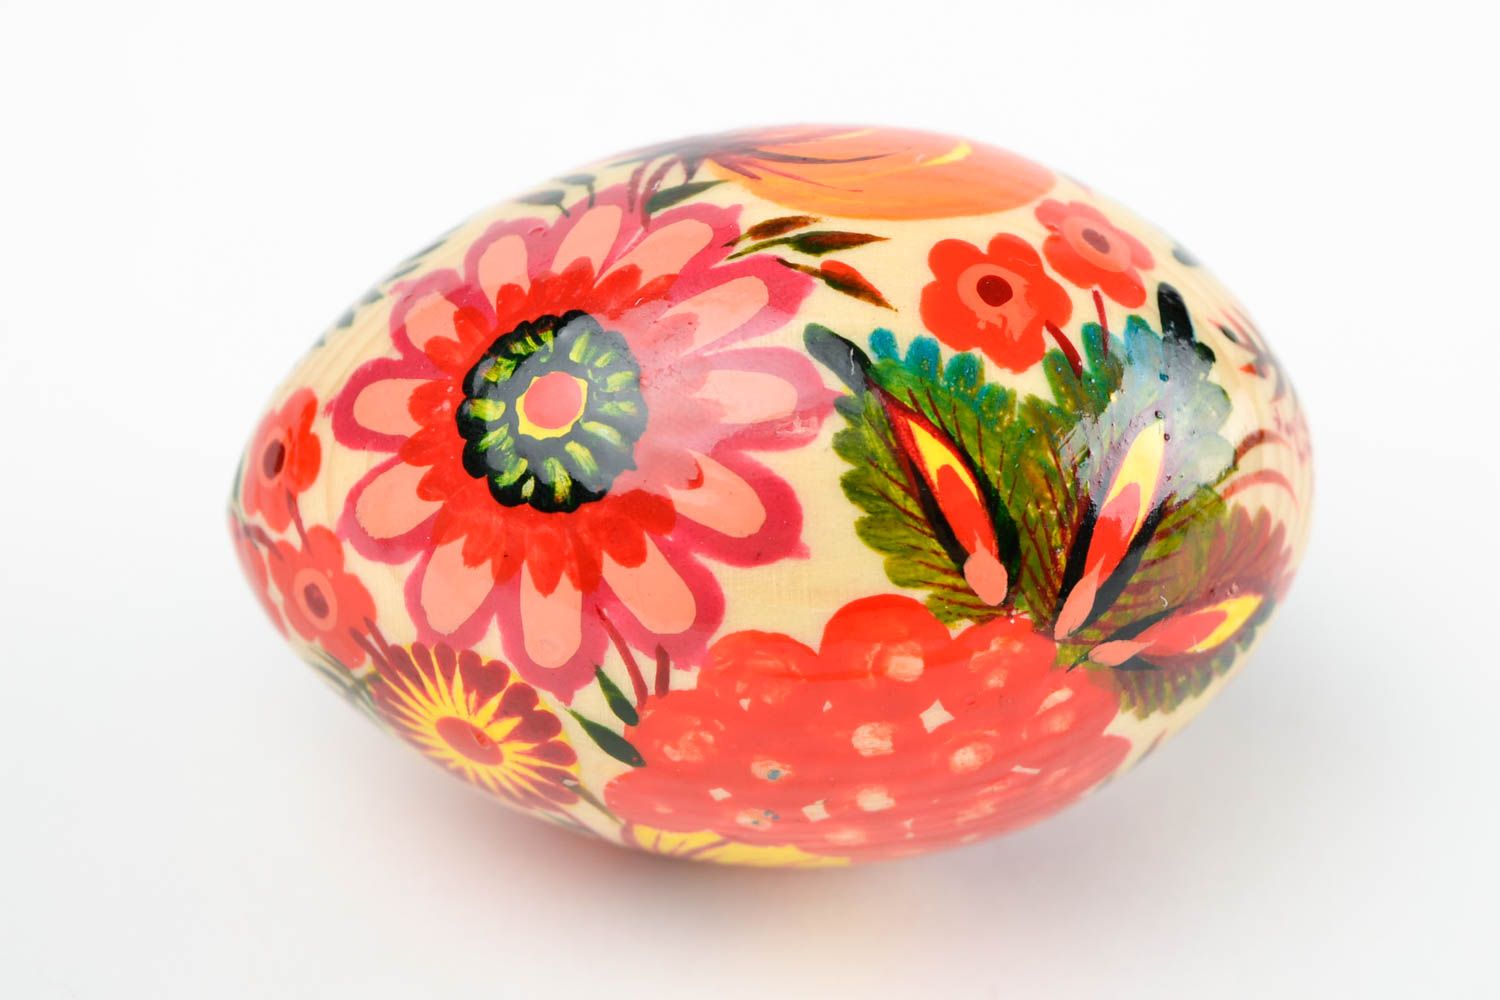 Unusual painted wooden egg handmade Easter egg room ideas decorative use only photo 4